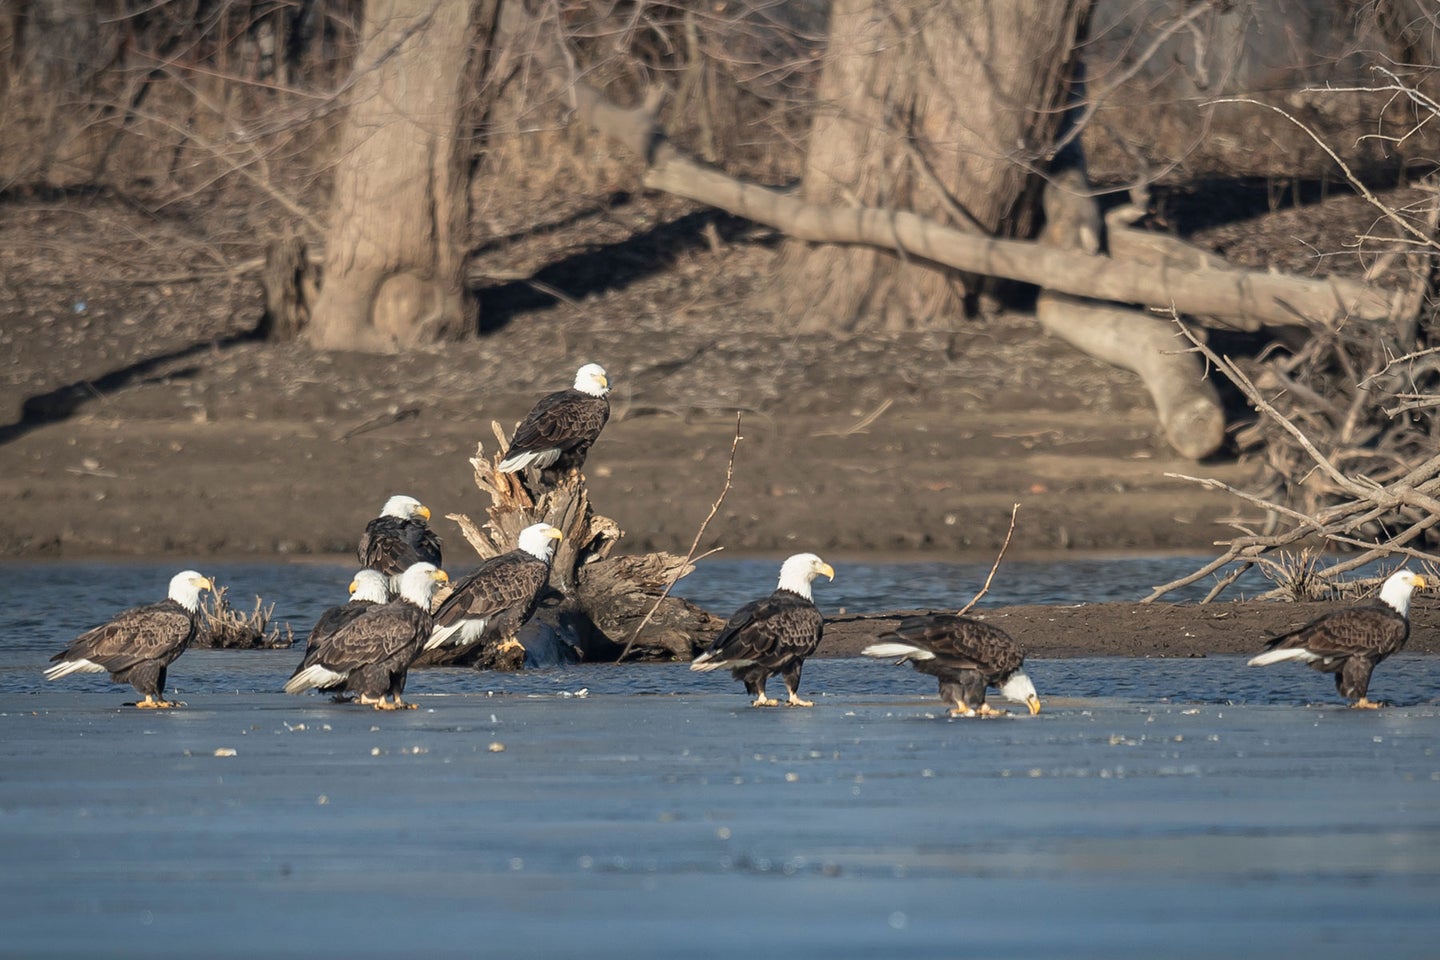 A group of bald eagles congregate on a river bank.